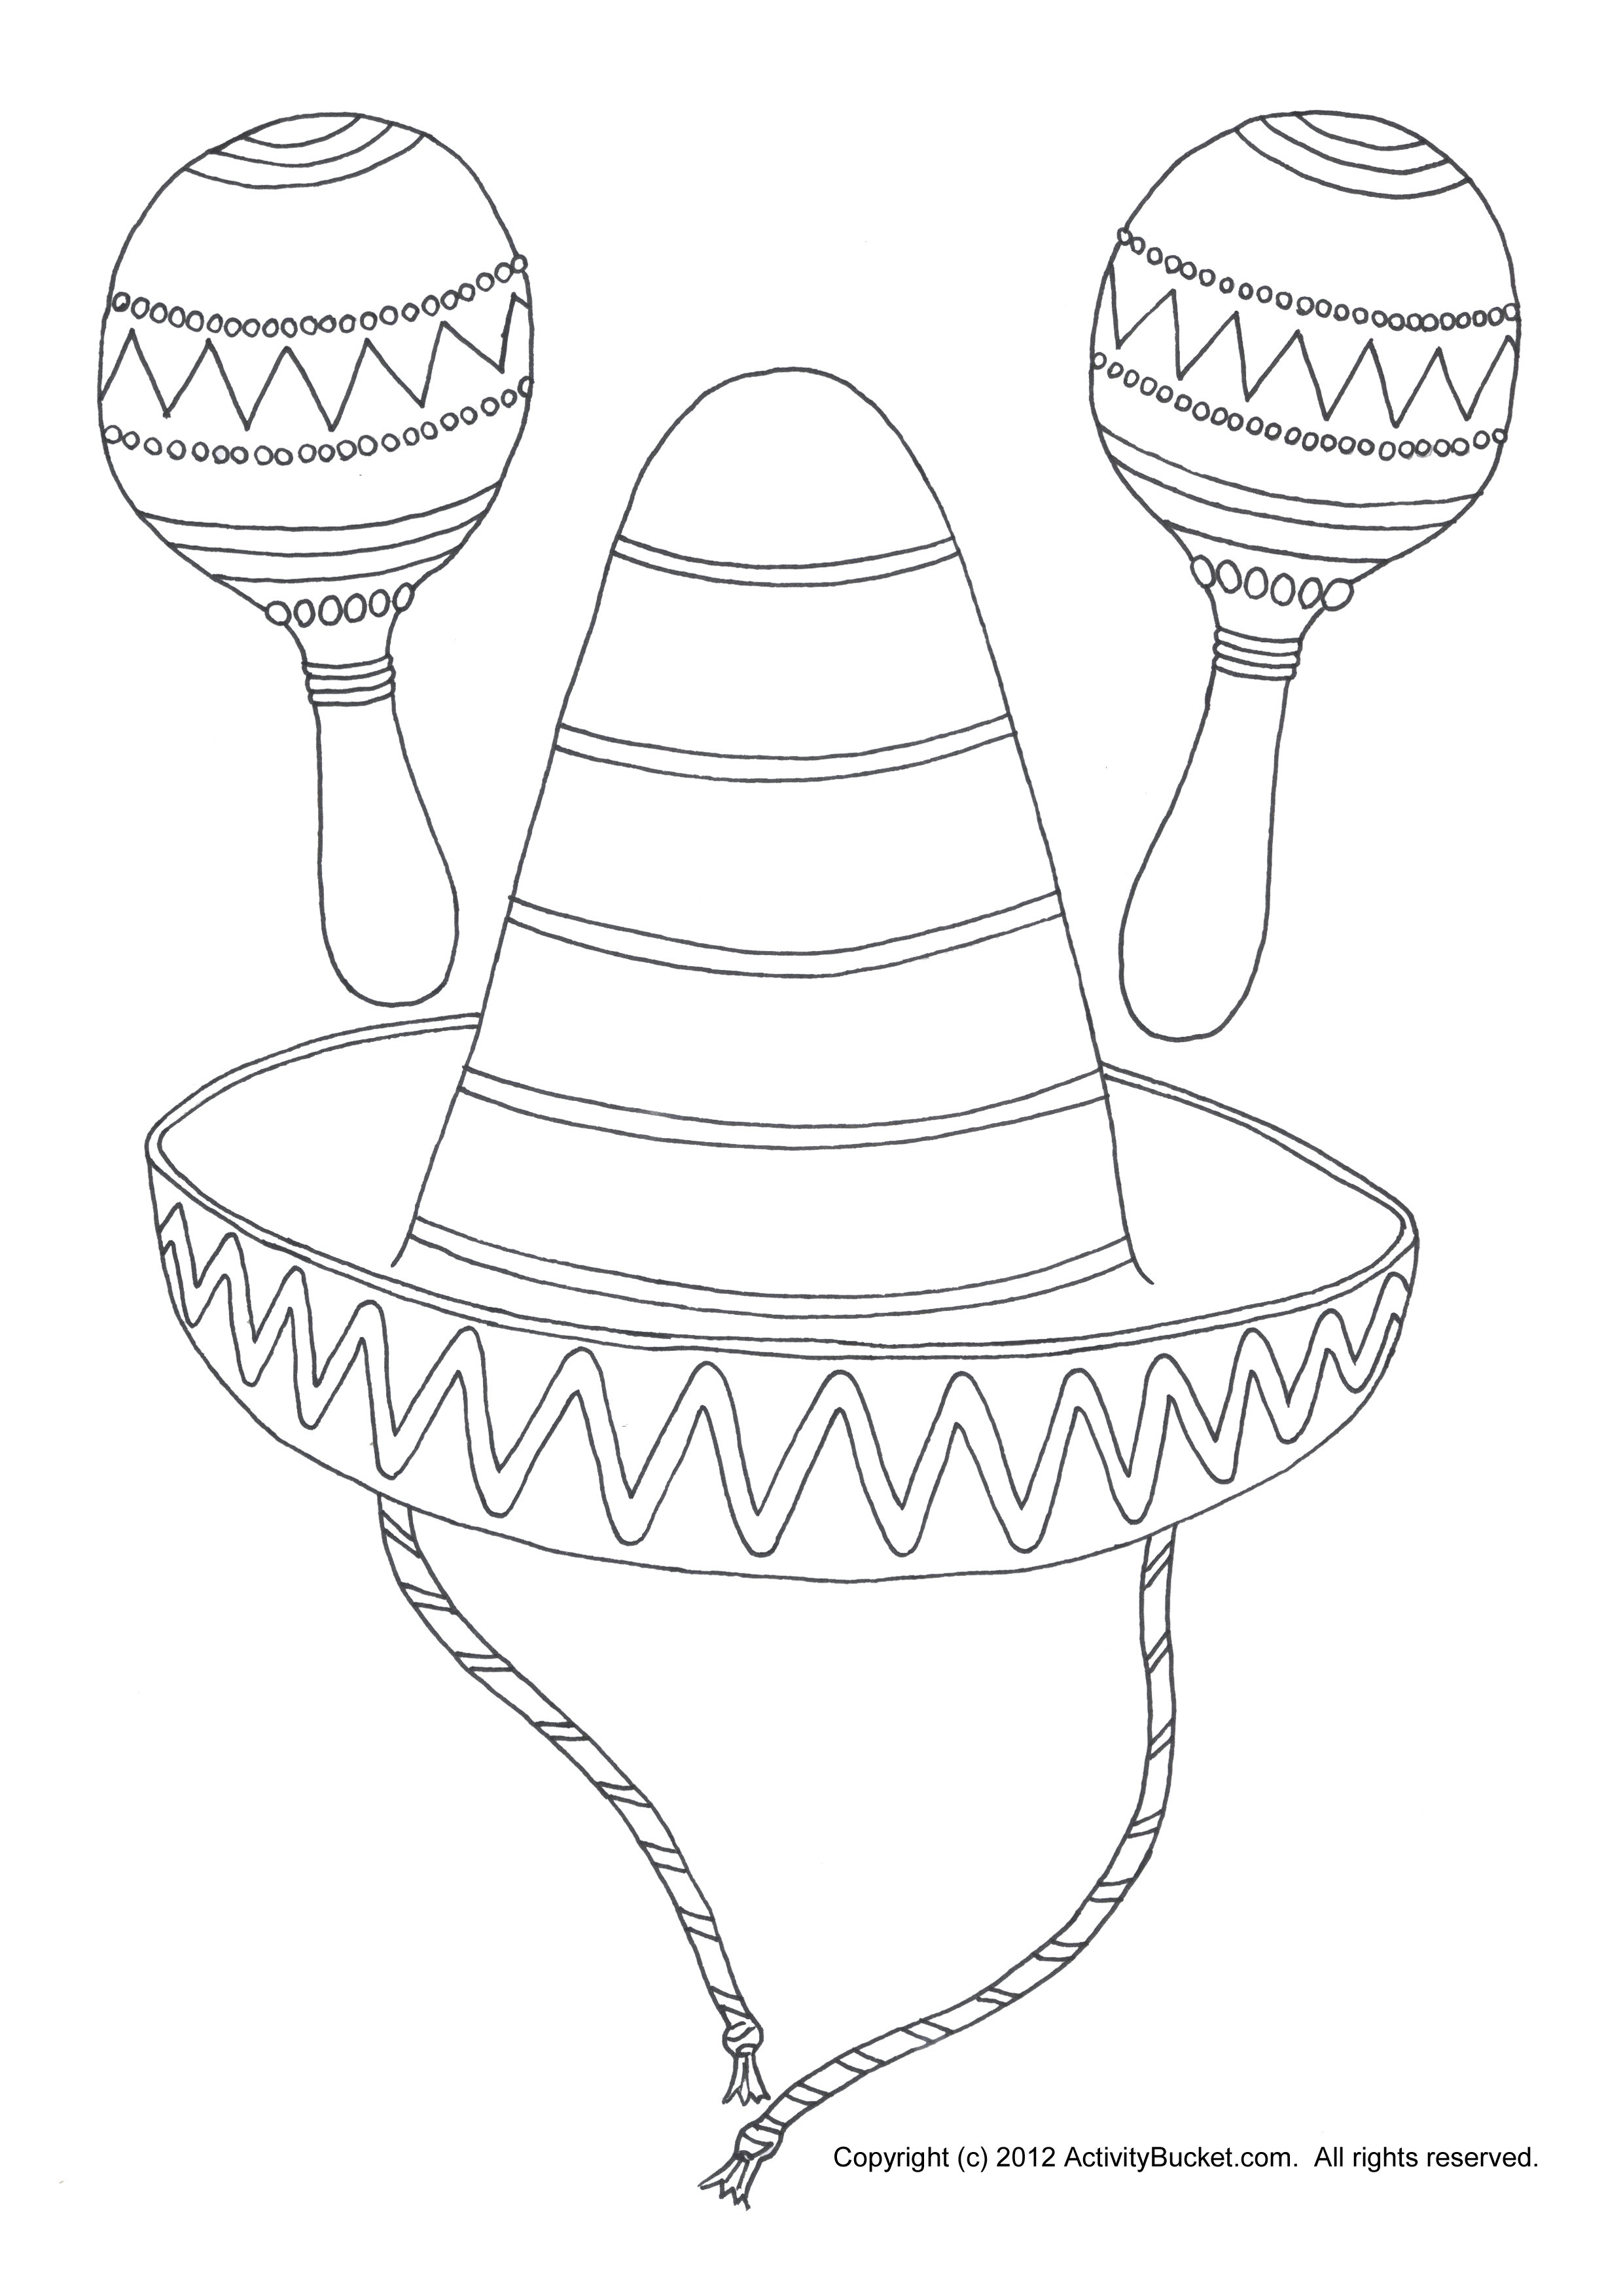 Sombrero Printable Template These Could Be Used When Celebrating Cinco